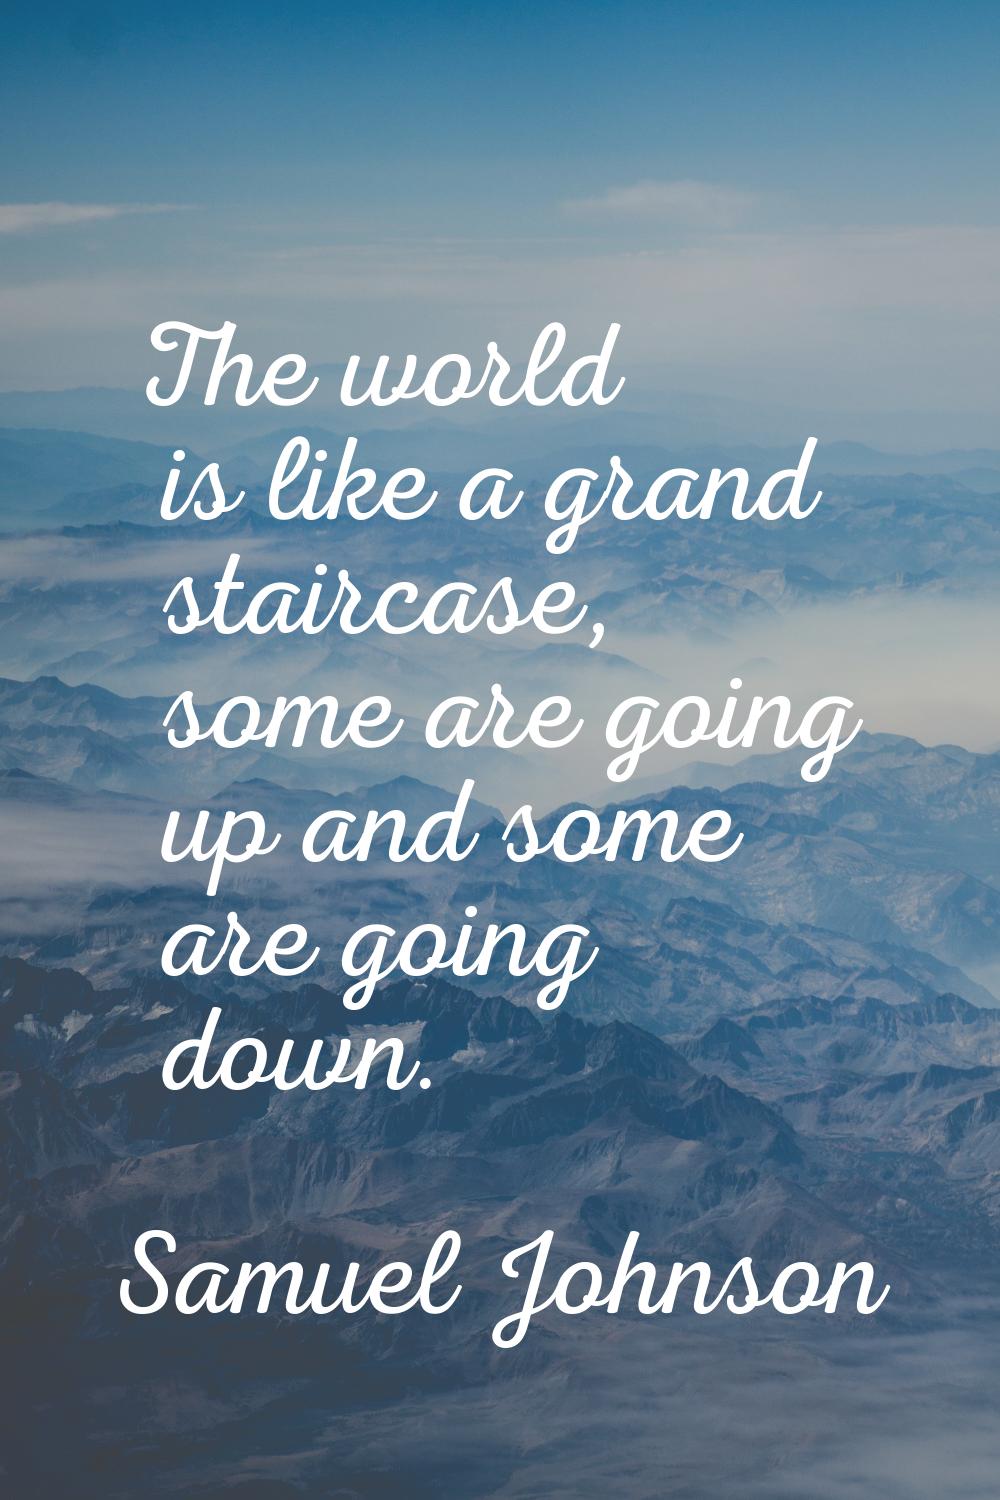 The world is like a grand staircase, some are going up and some are going down.